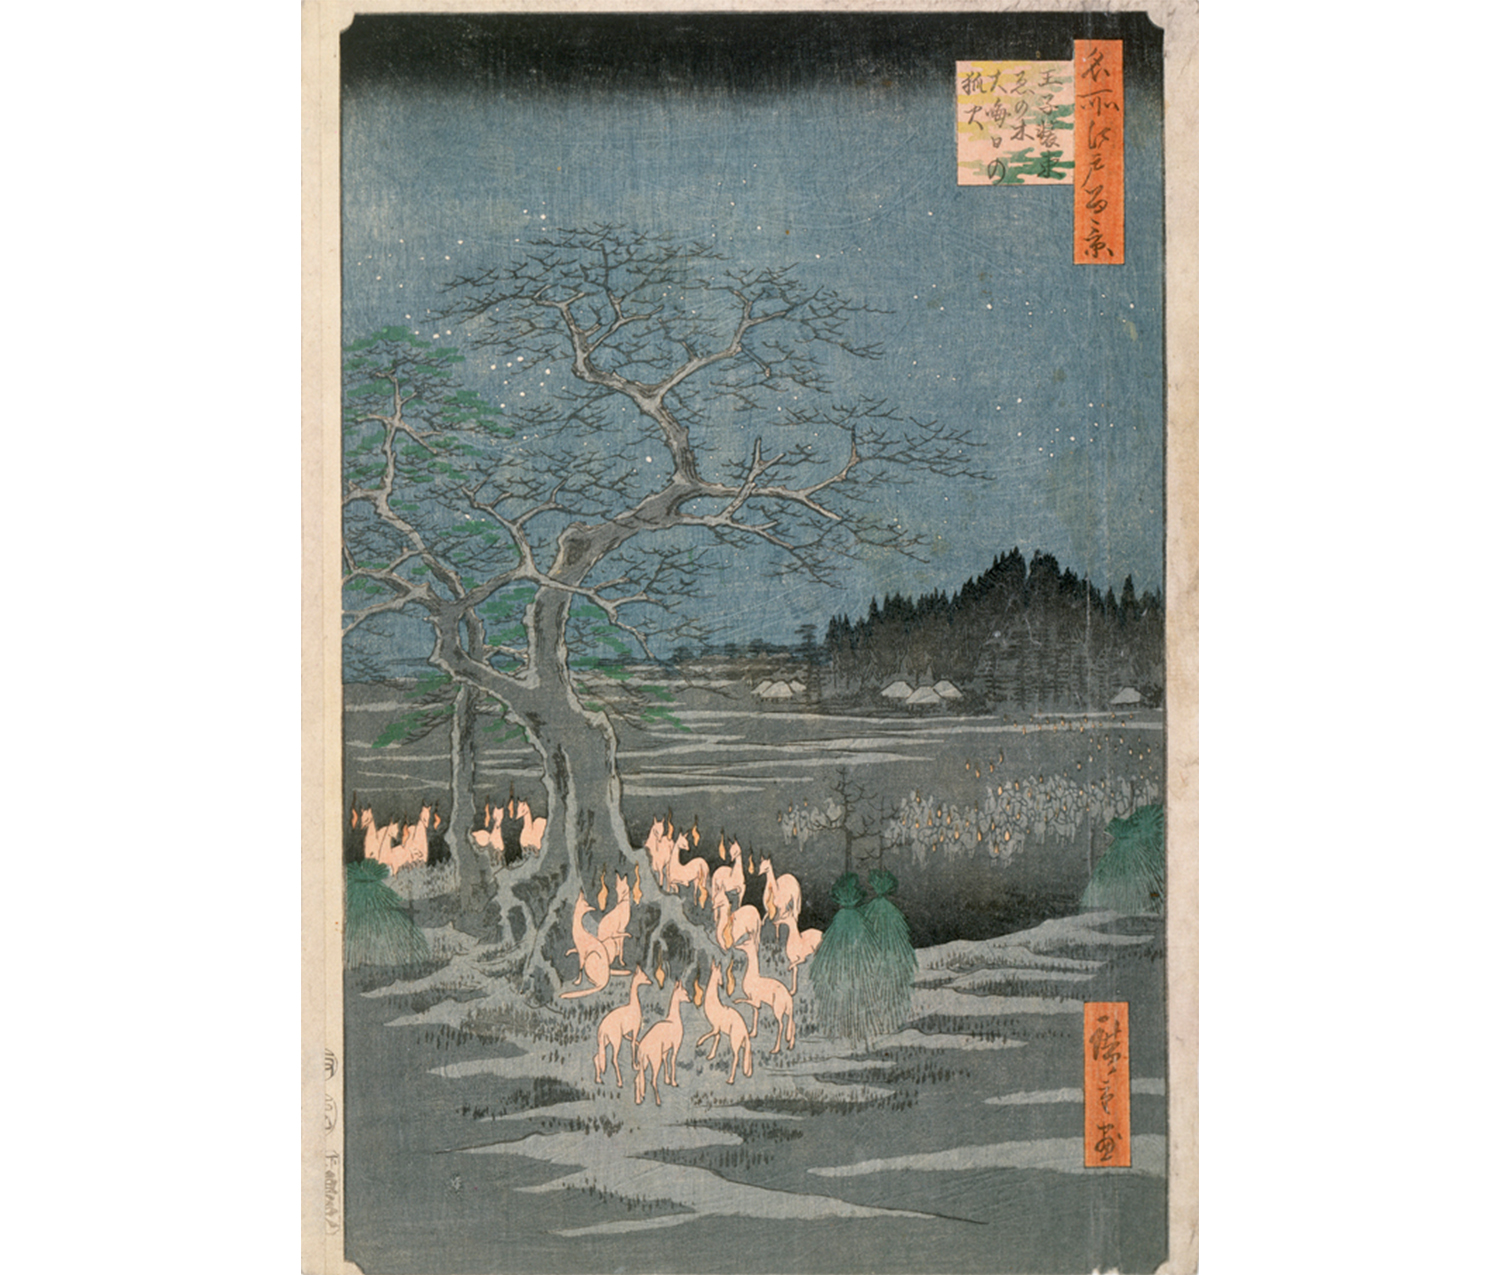 Night scene, a group of foxes blowing flames gather around a large hackberry tree (enoki) and haystacks, in the fields to the distant right a second group of fire breathing foxes approach